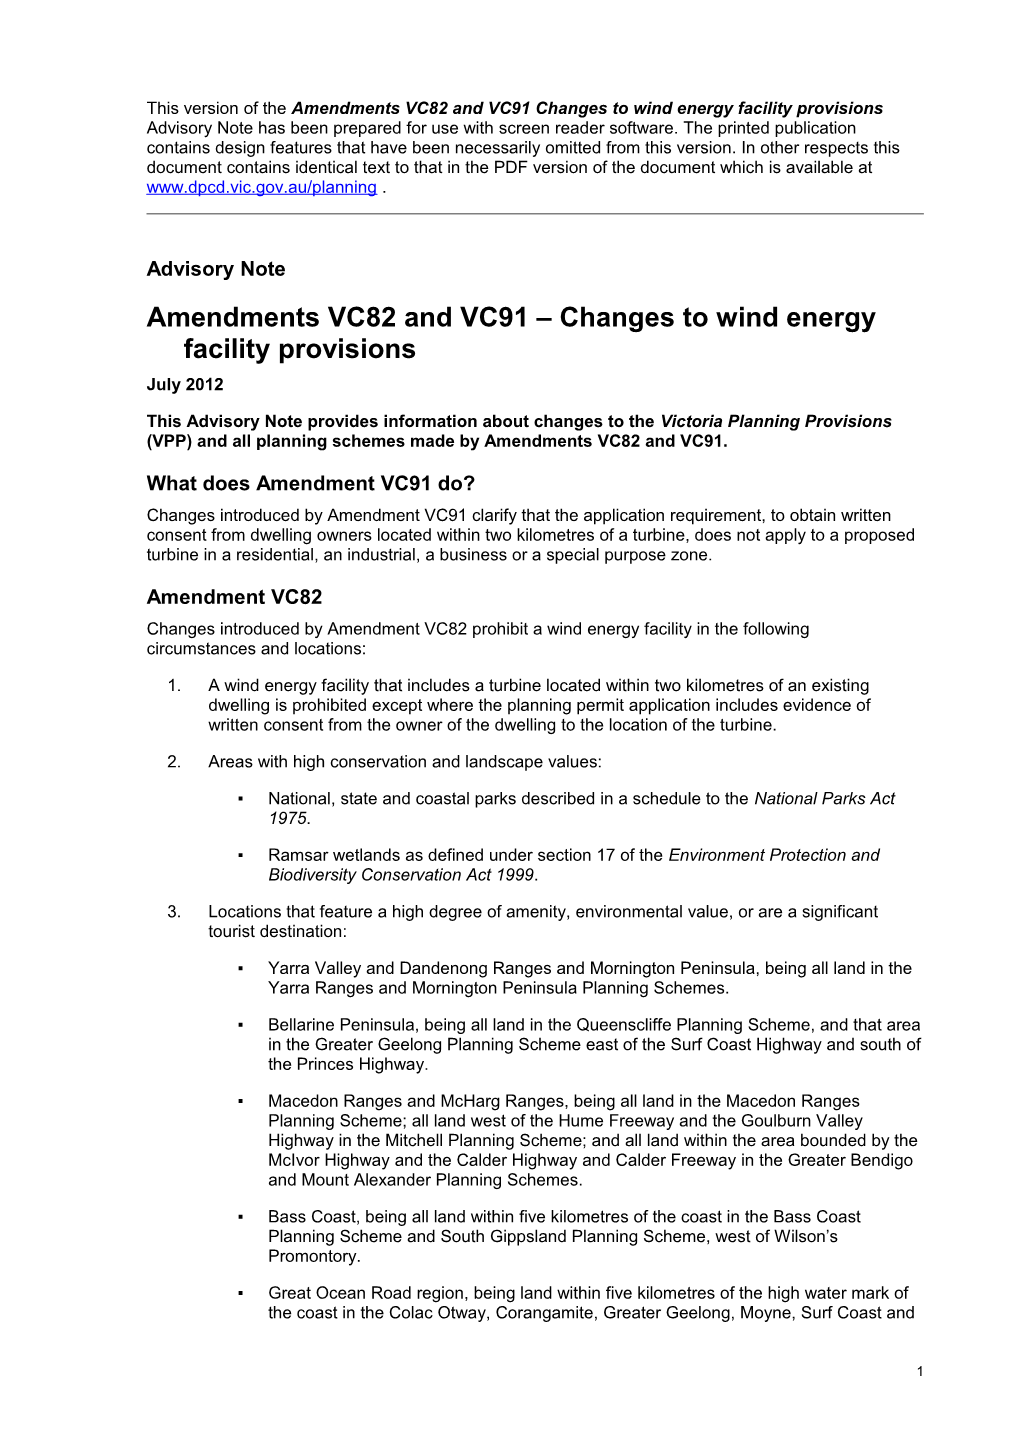 Amendments VC82 and VC91 Changes to Wind Energy Facility Provisions Advisory Note